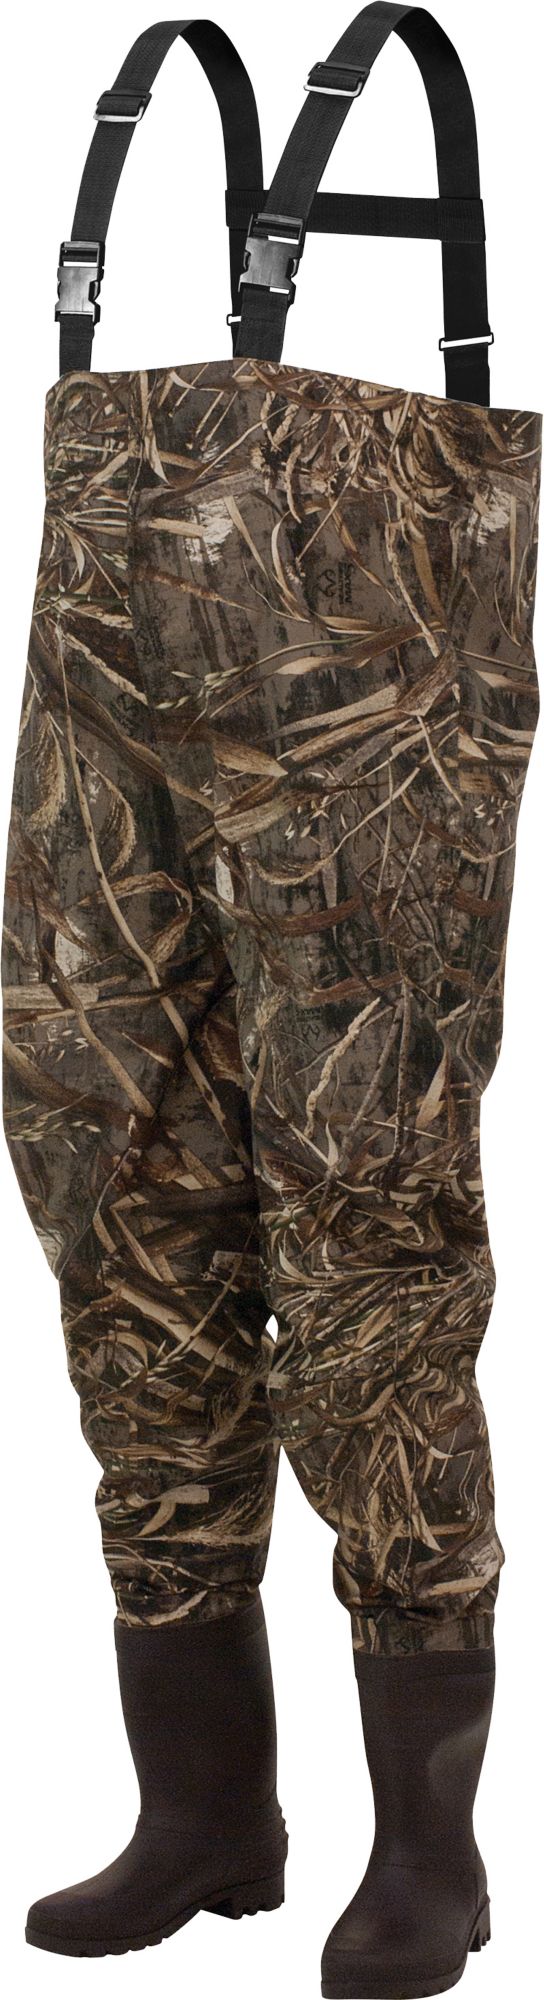 frogg toggs Rana II Camouflage Chest Waders, Men's, Size 8, Max-5